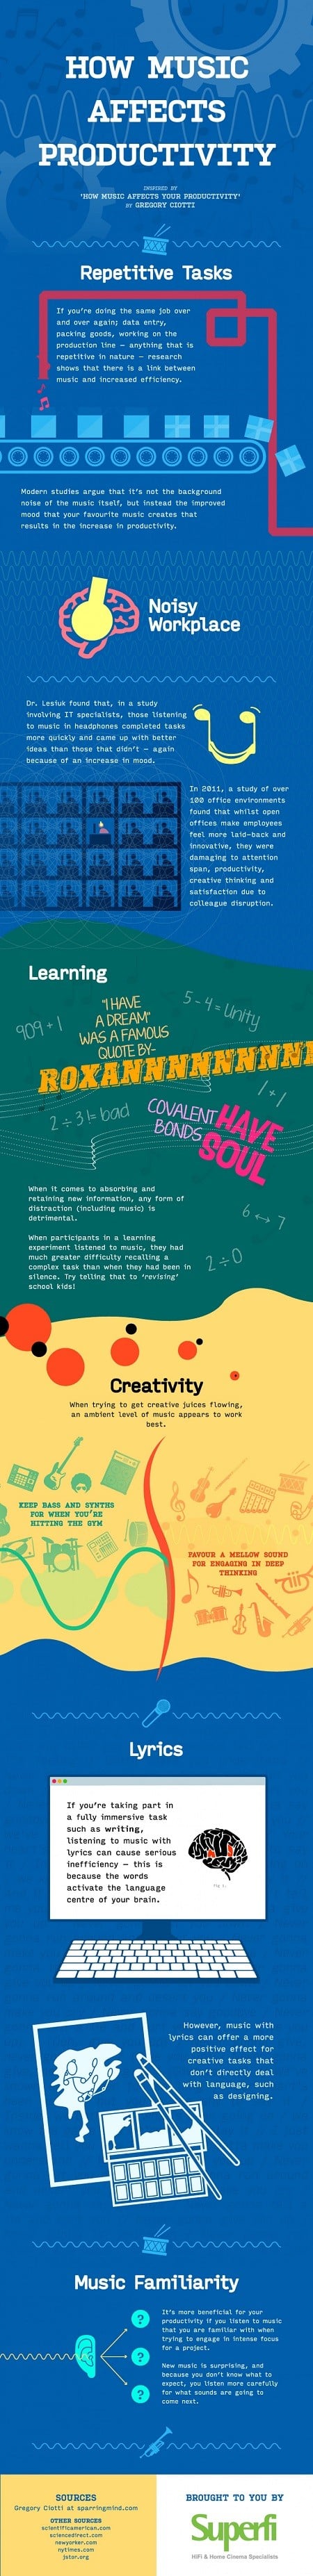 150613-how-music-affects-productivity-infographic-preview